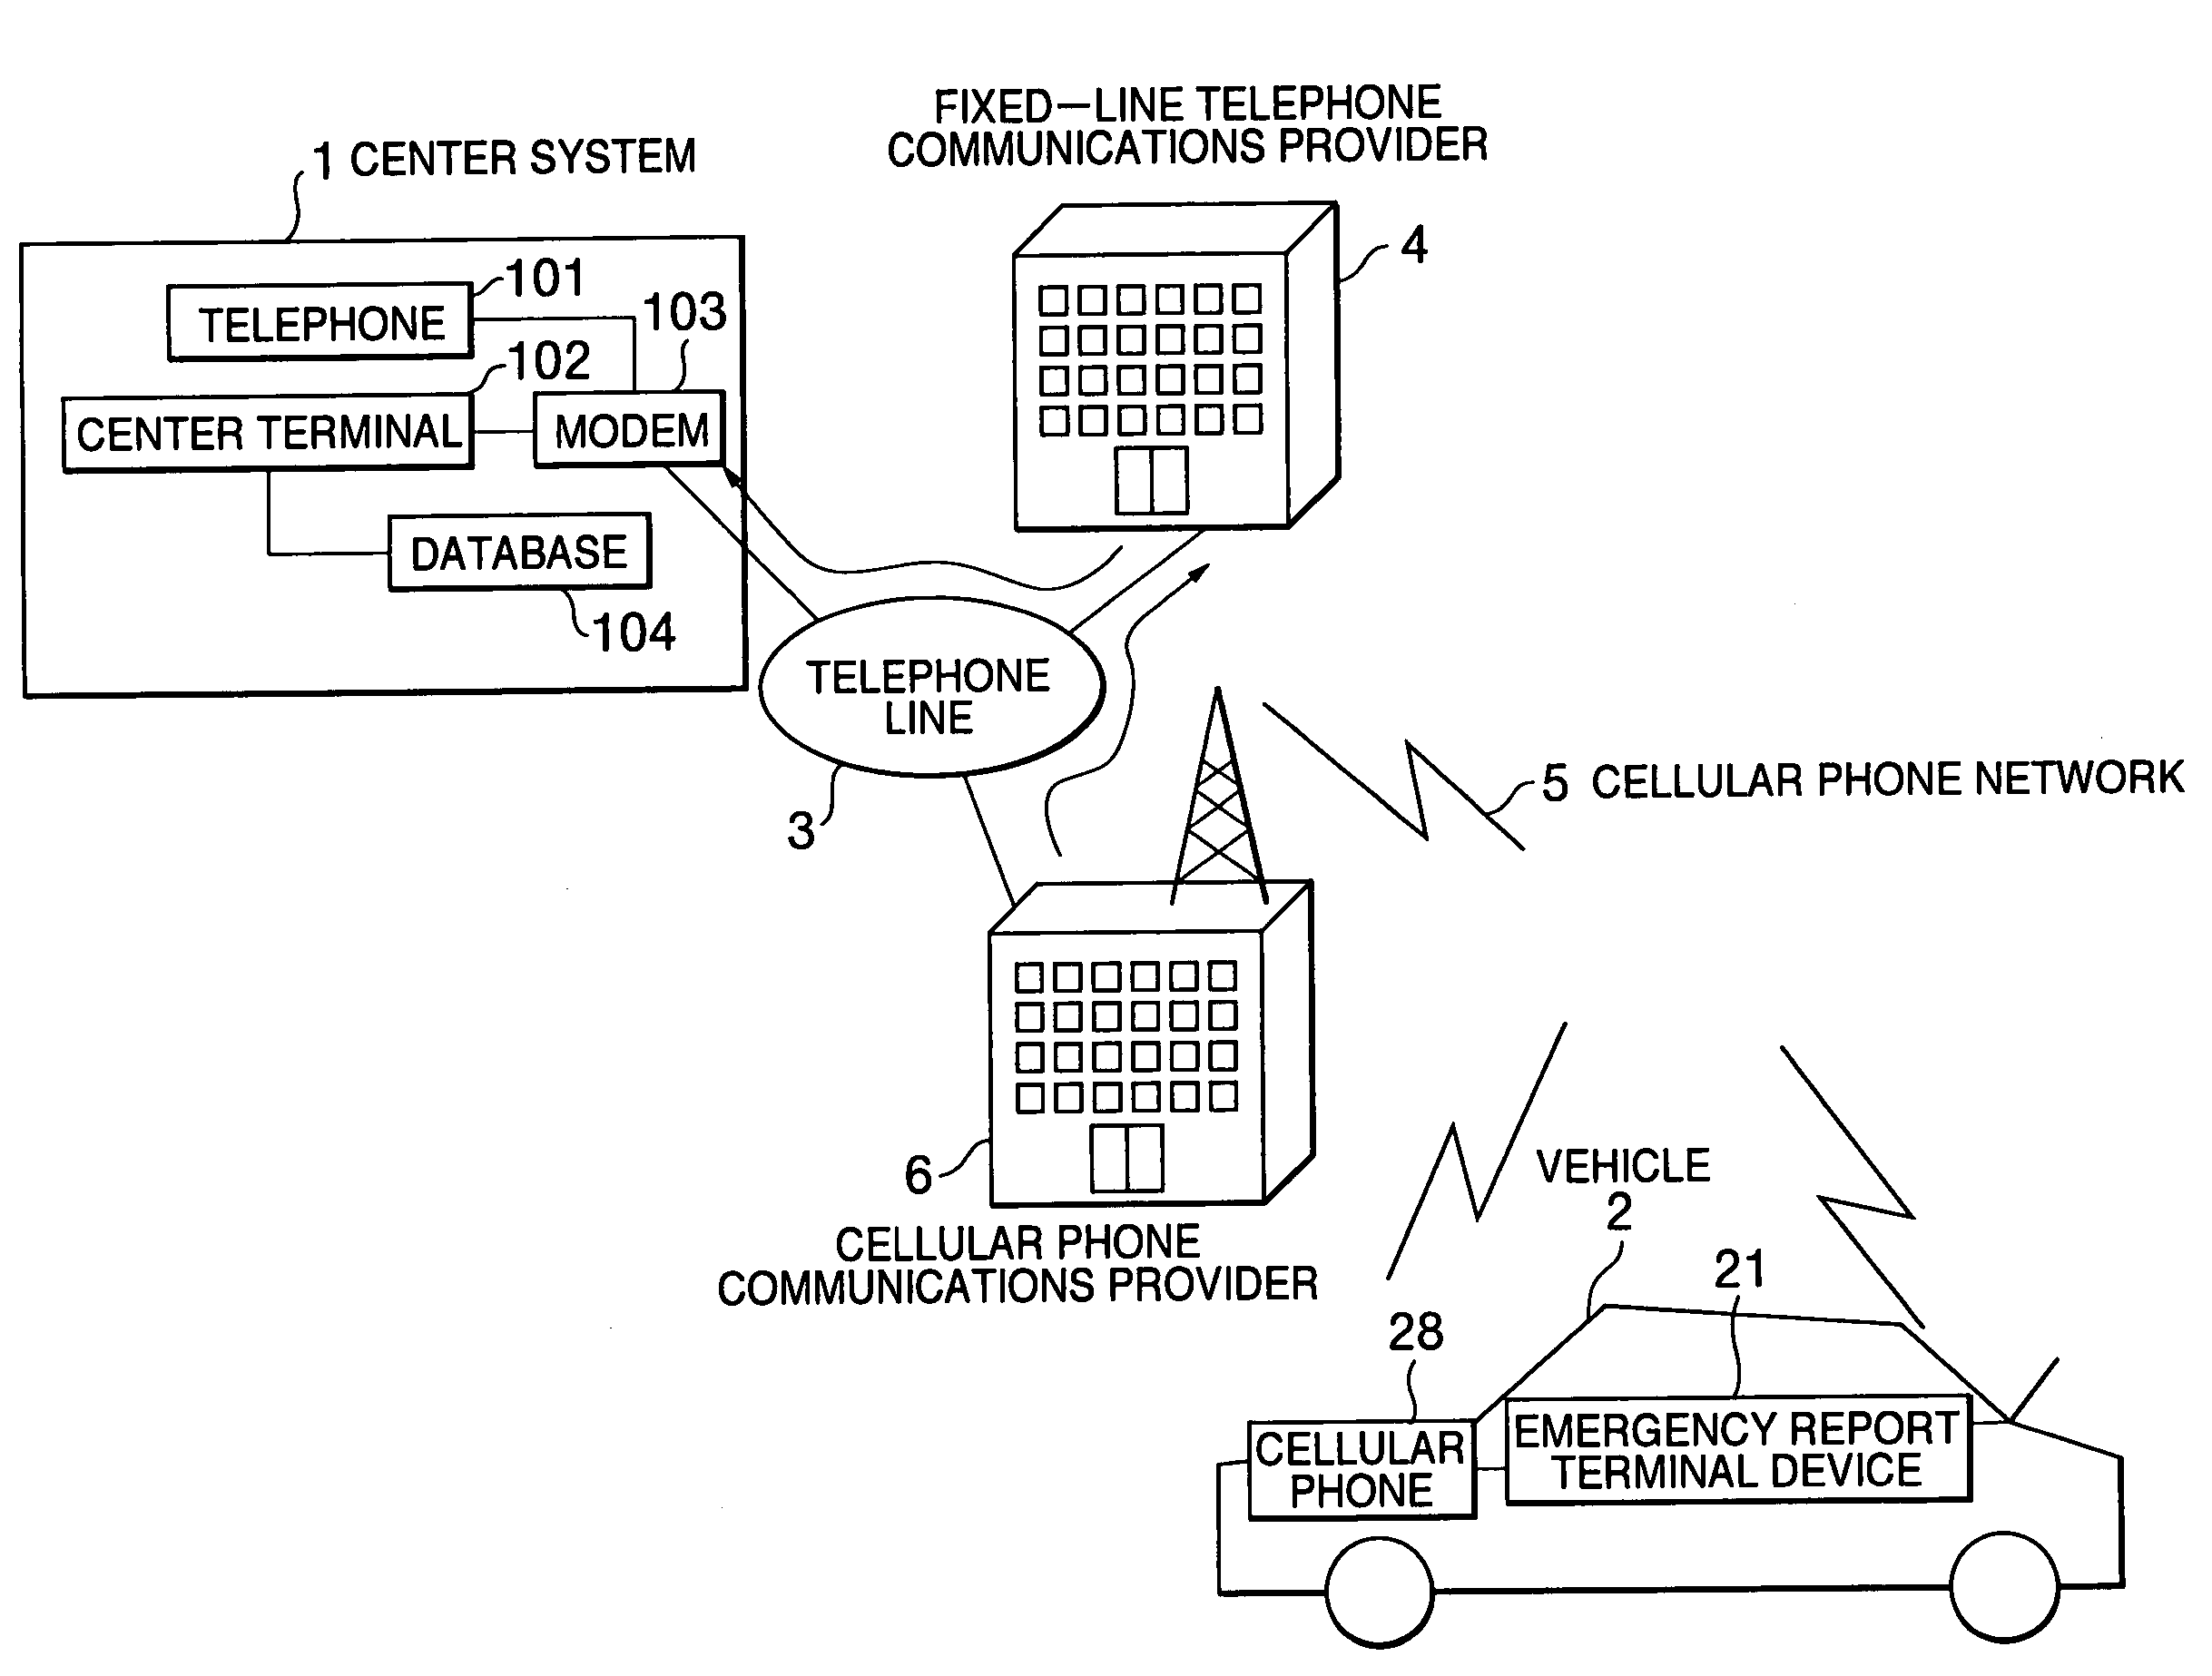 Emergency report terminal device and system